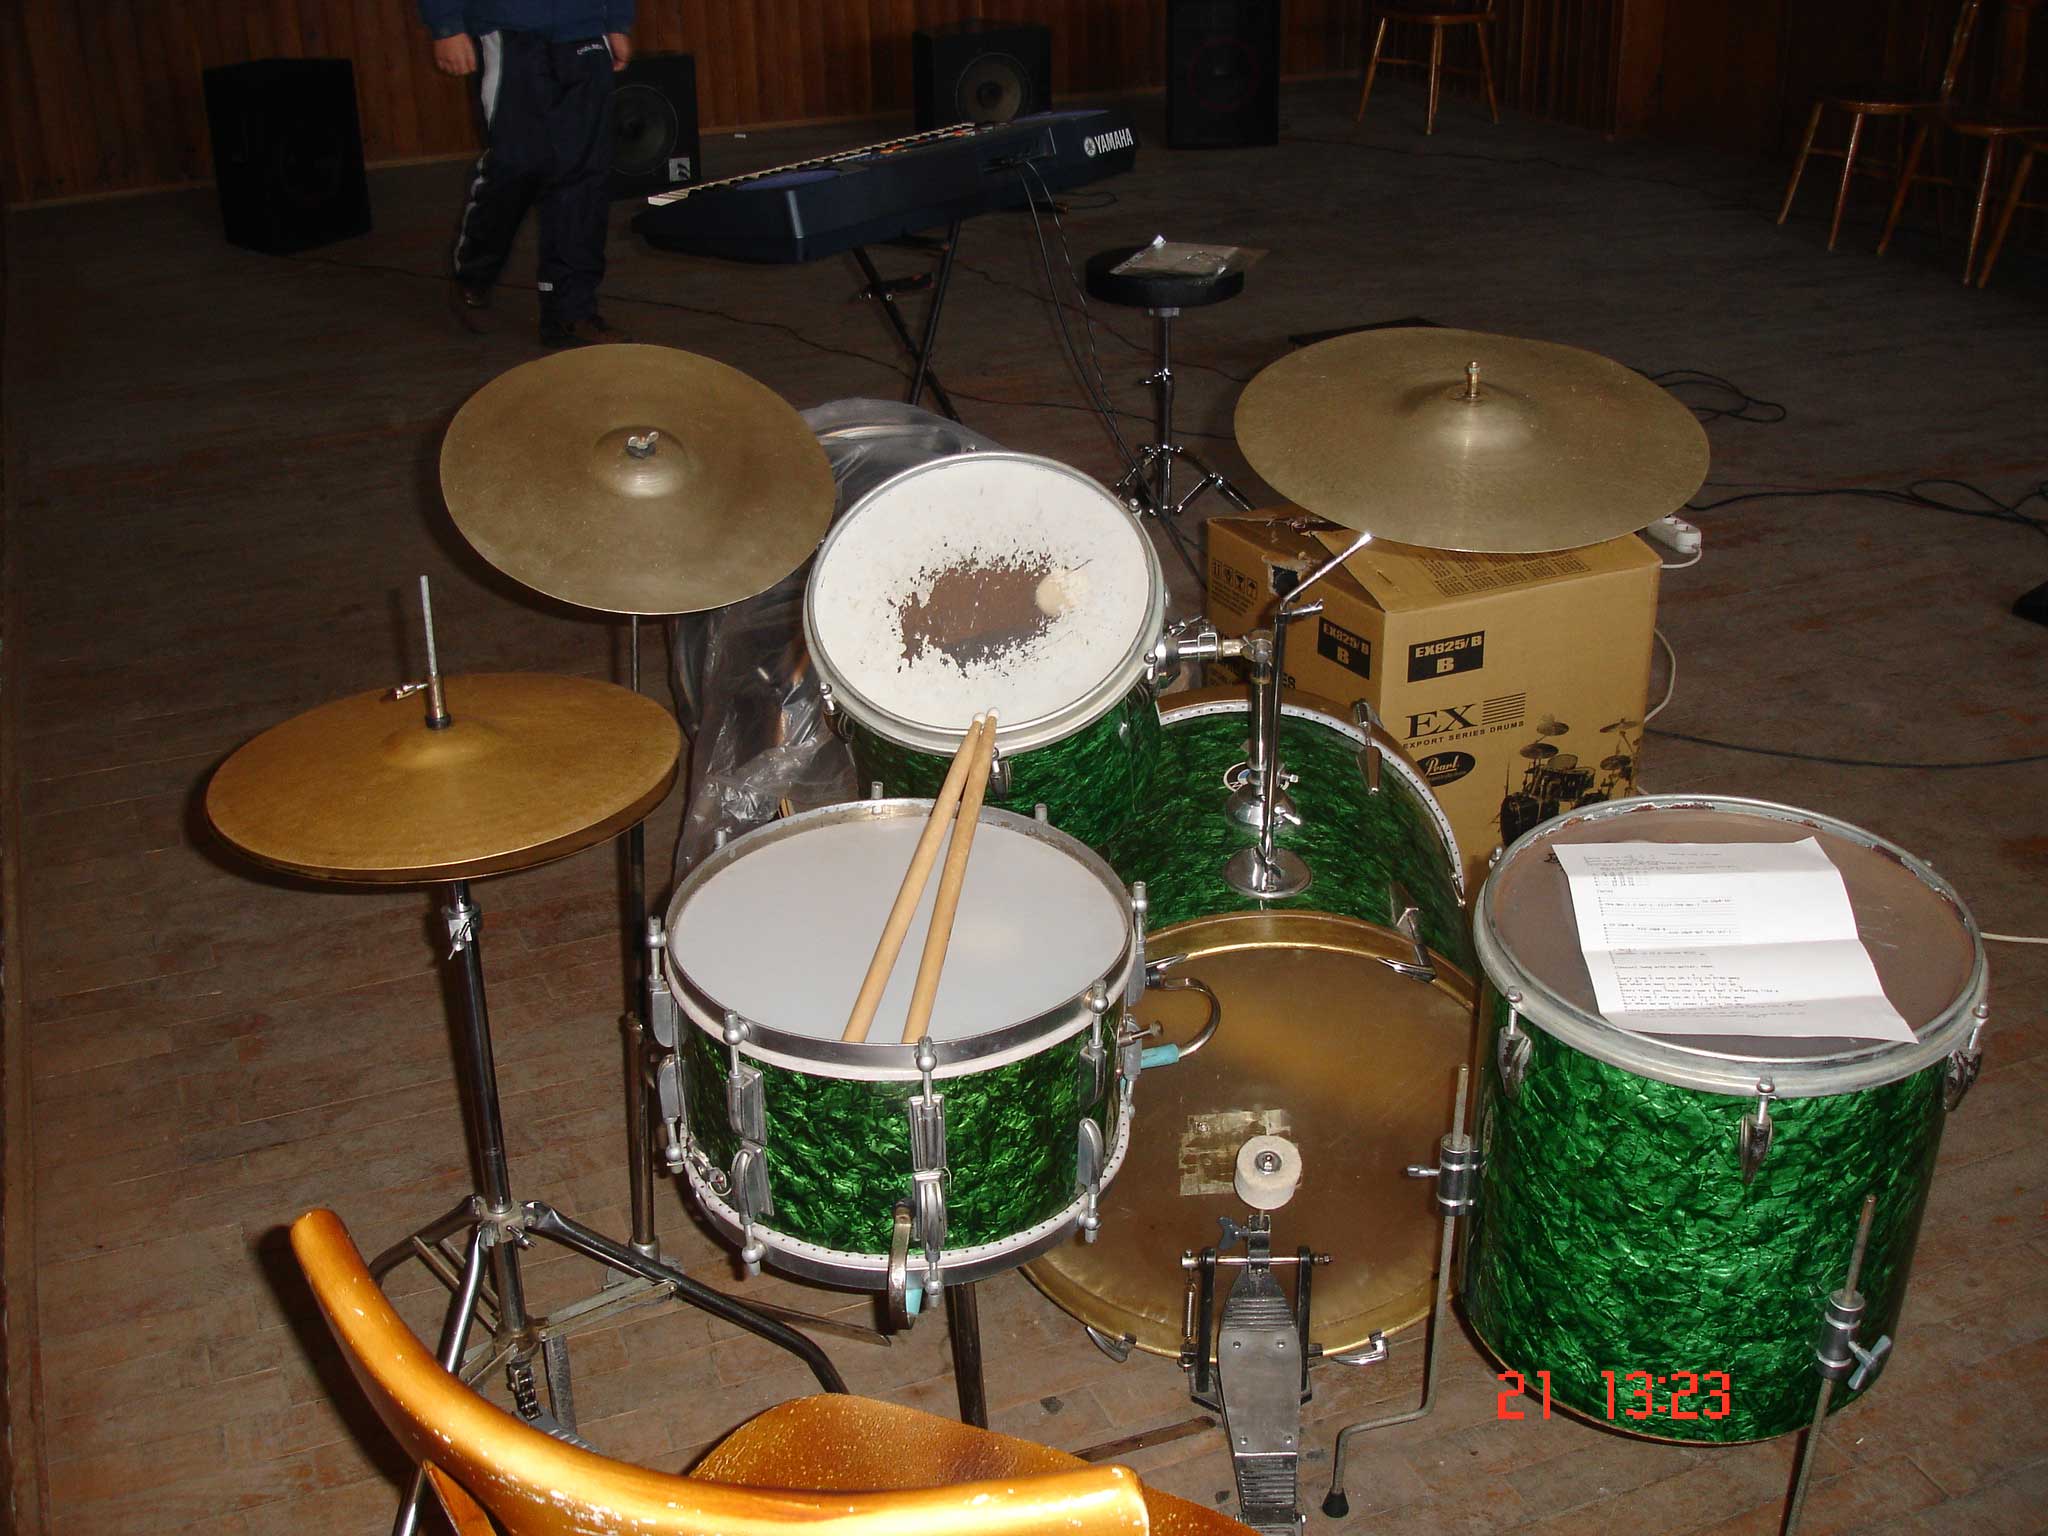 My first set of Romanian drums.